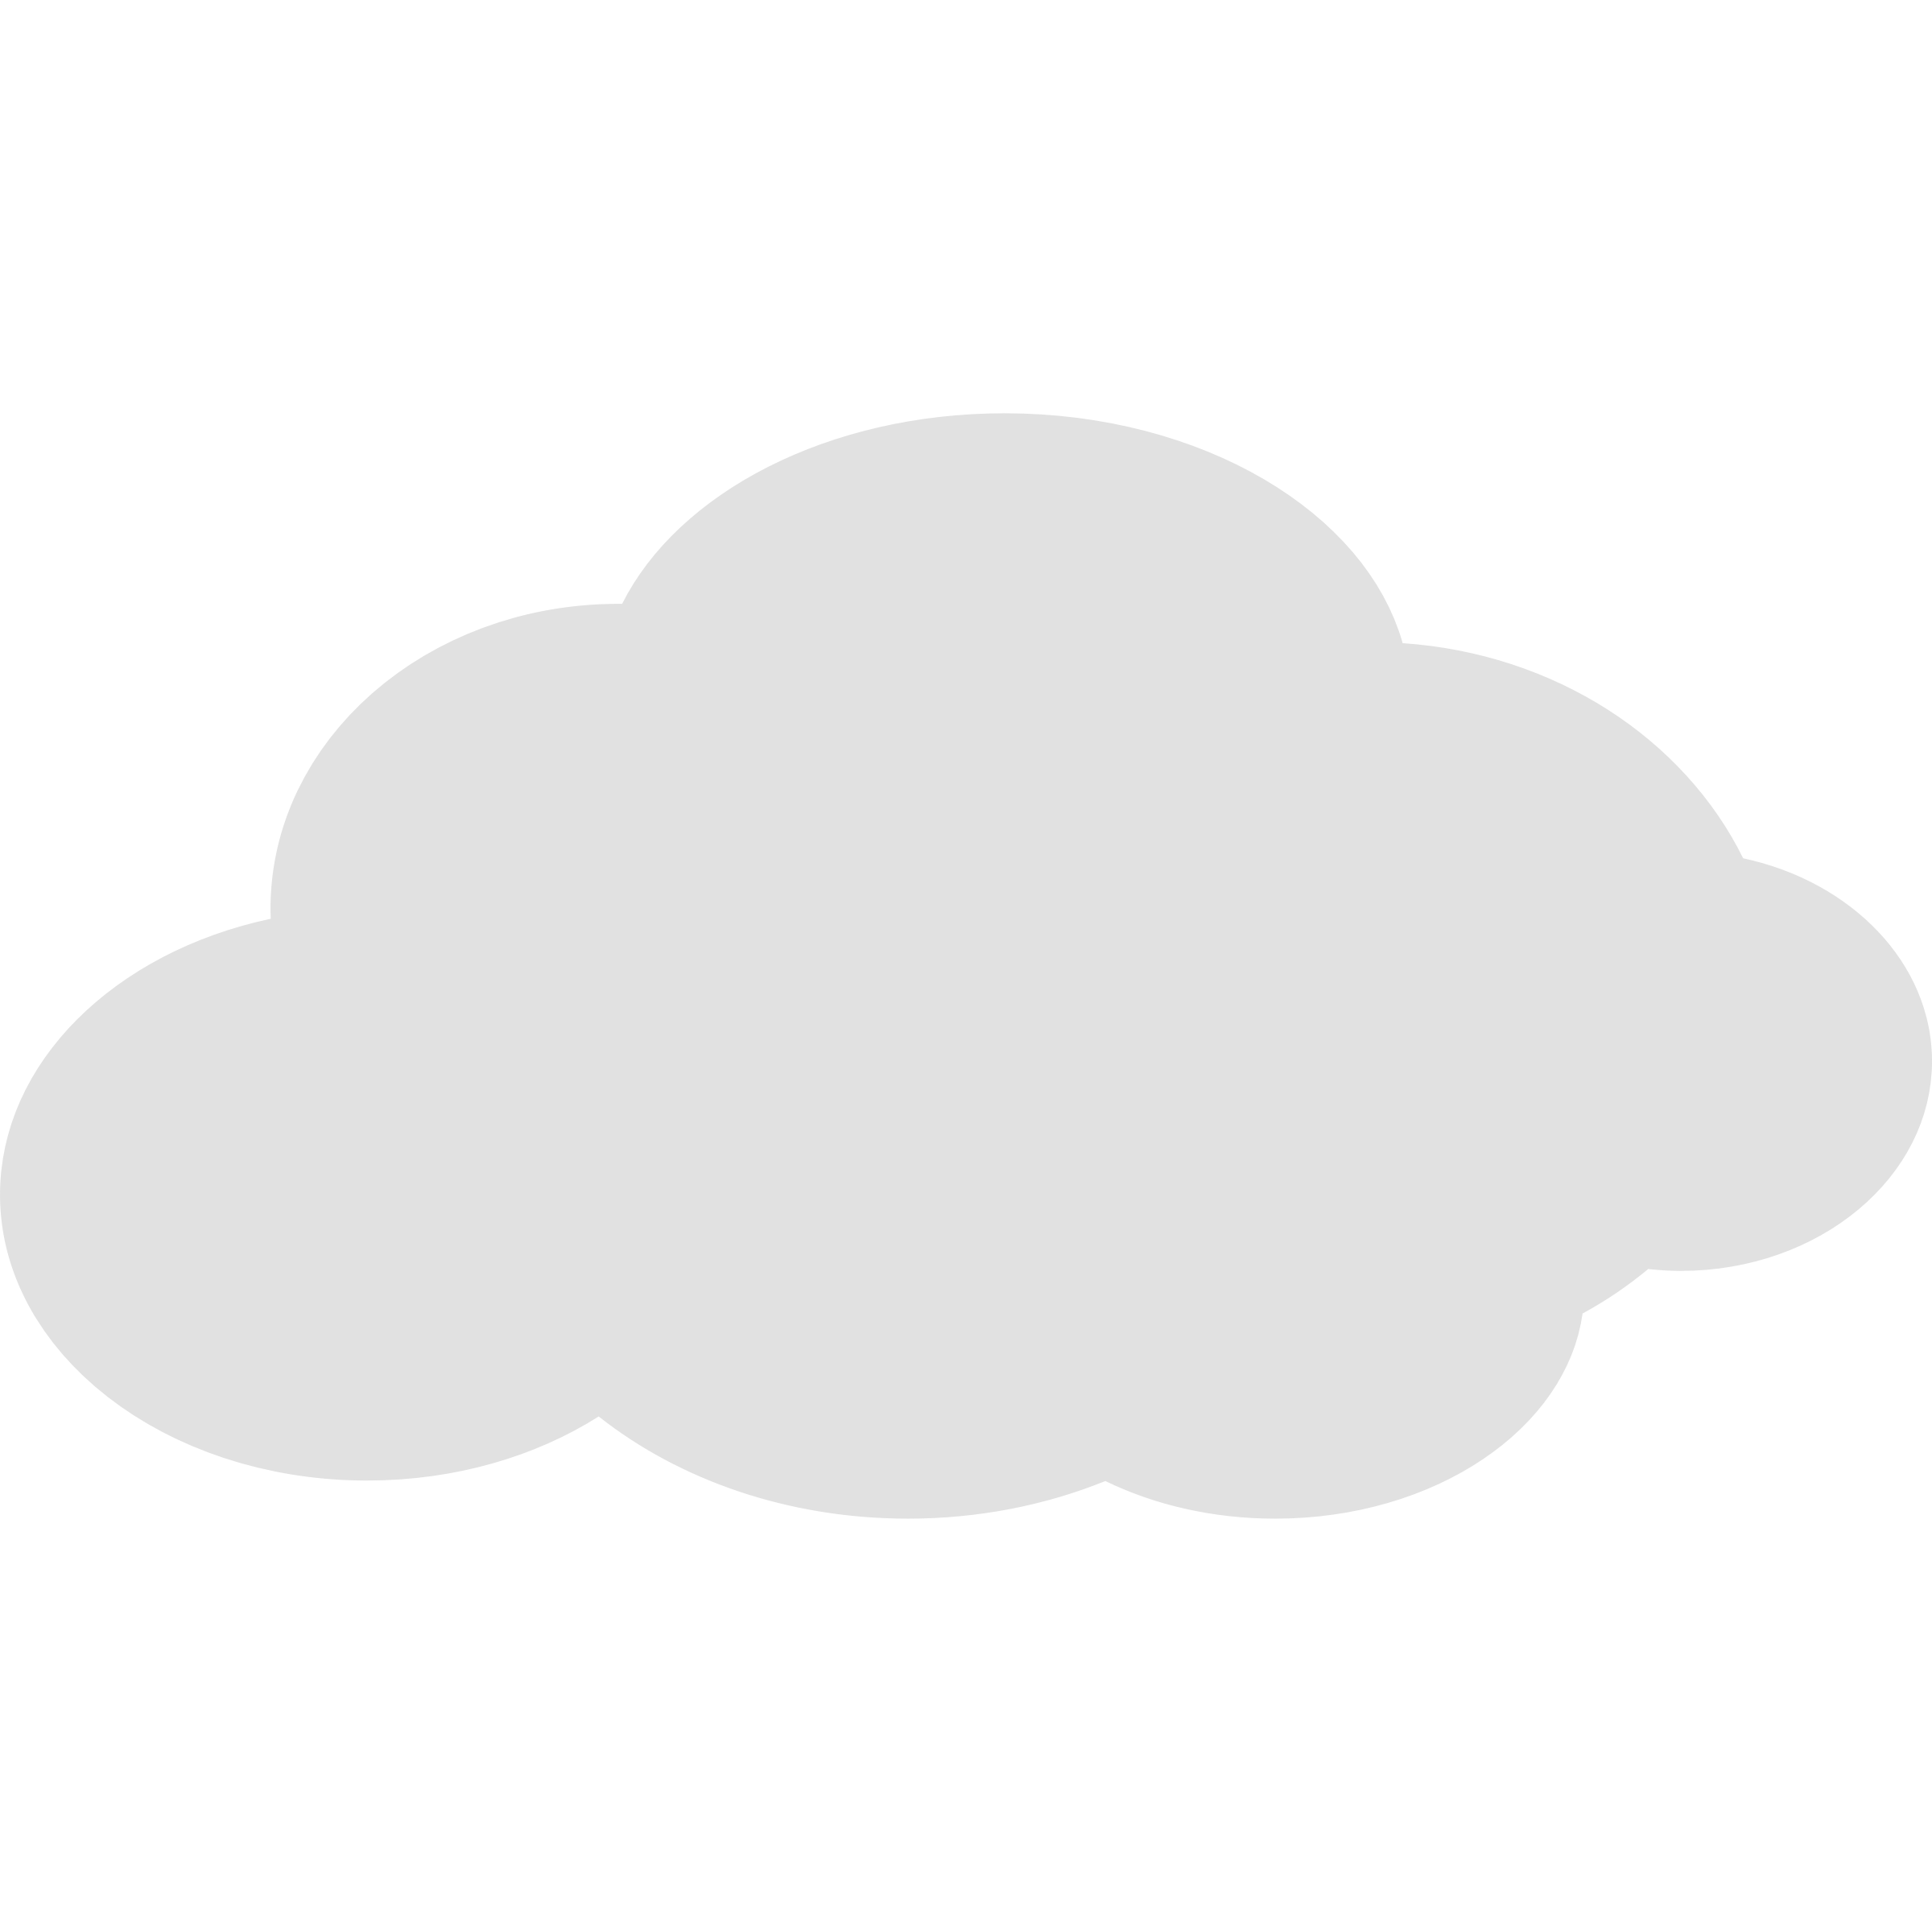 Outline Of Cloud Image 7 Free Download Png Clipart